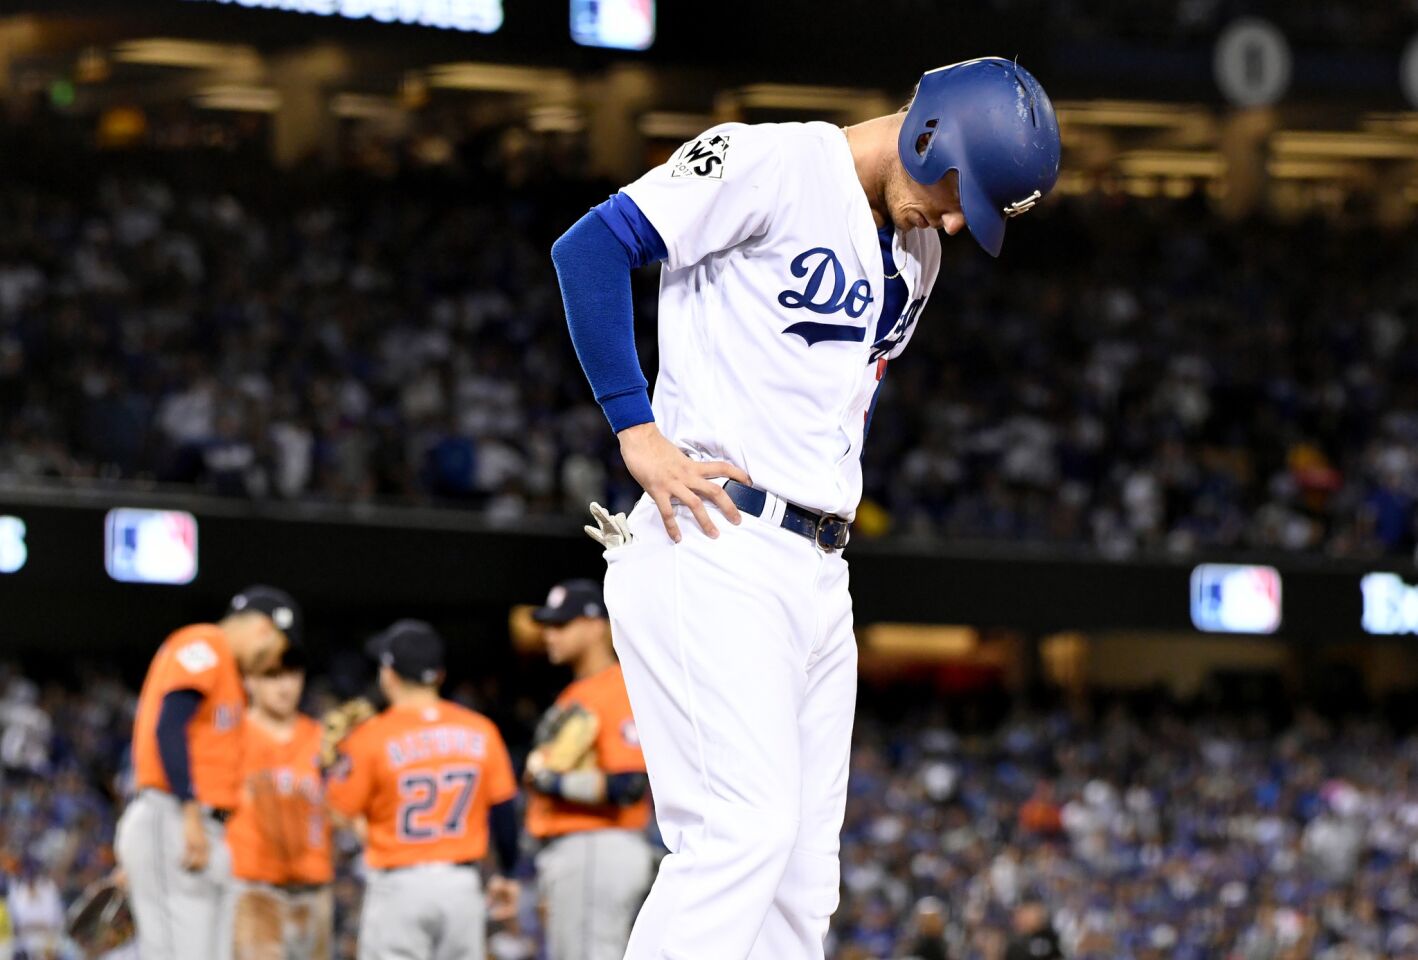 Cody Bellinger looks down while standing on first base after a force-out in the fifth inning.